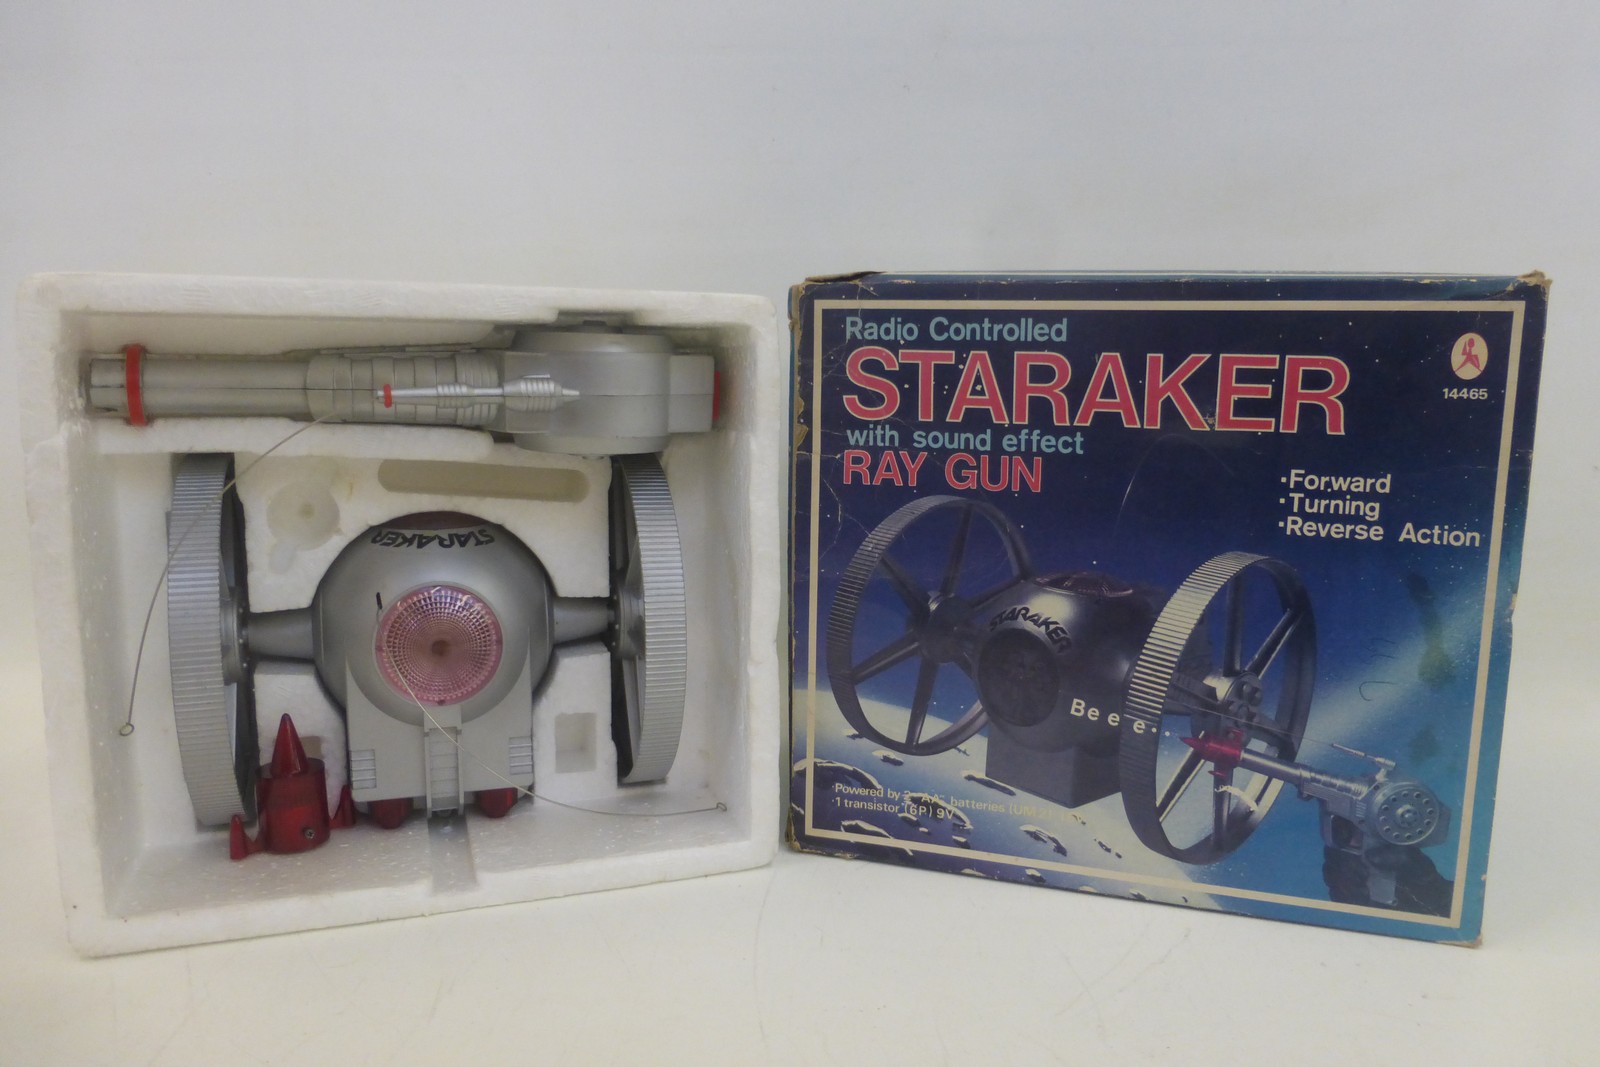 A boxed radio controlled Staraker, with sound effect ray gun.